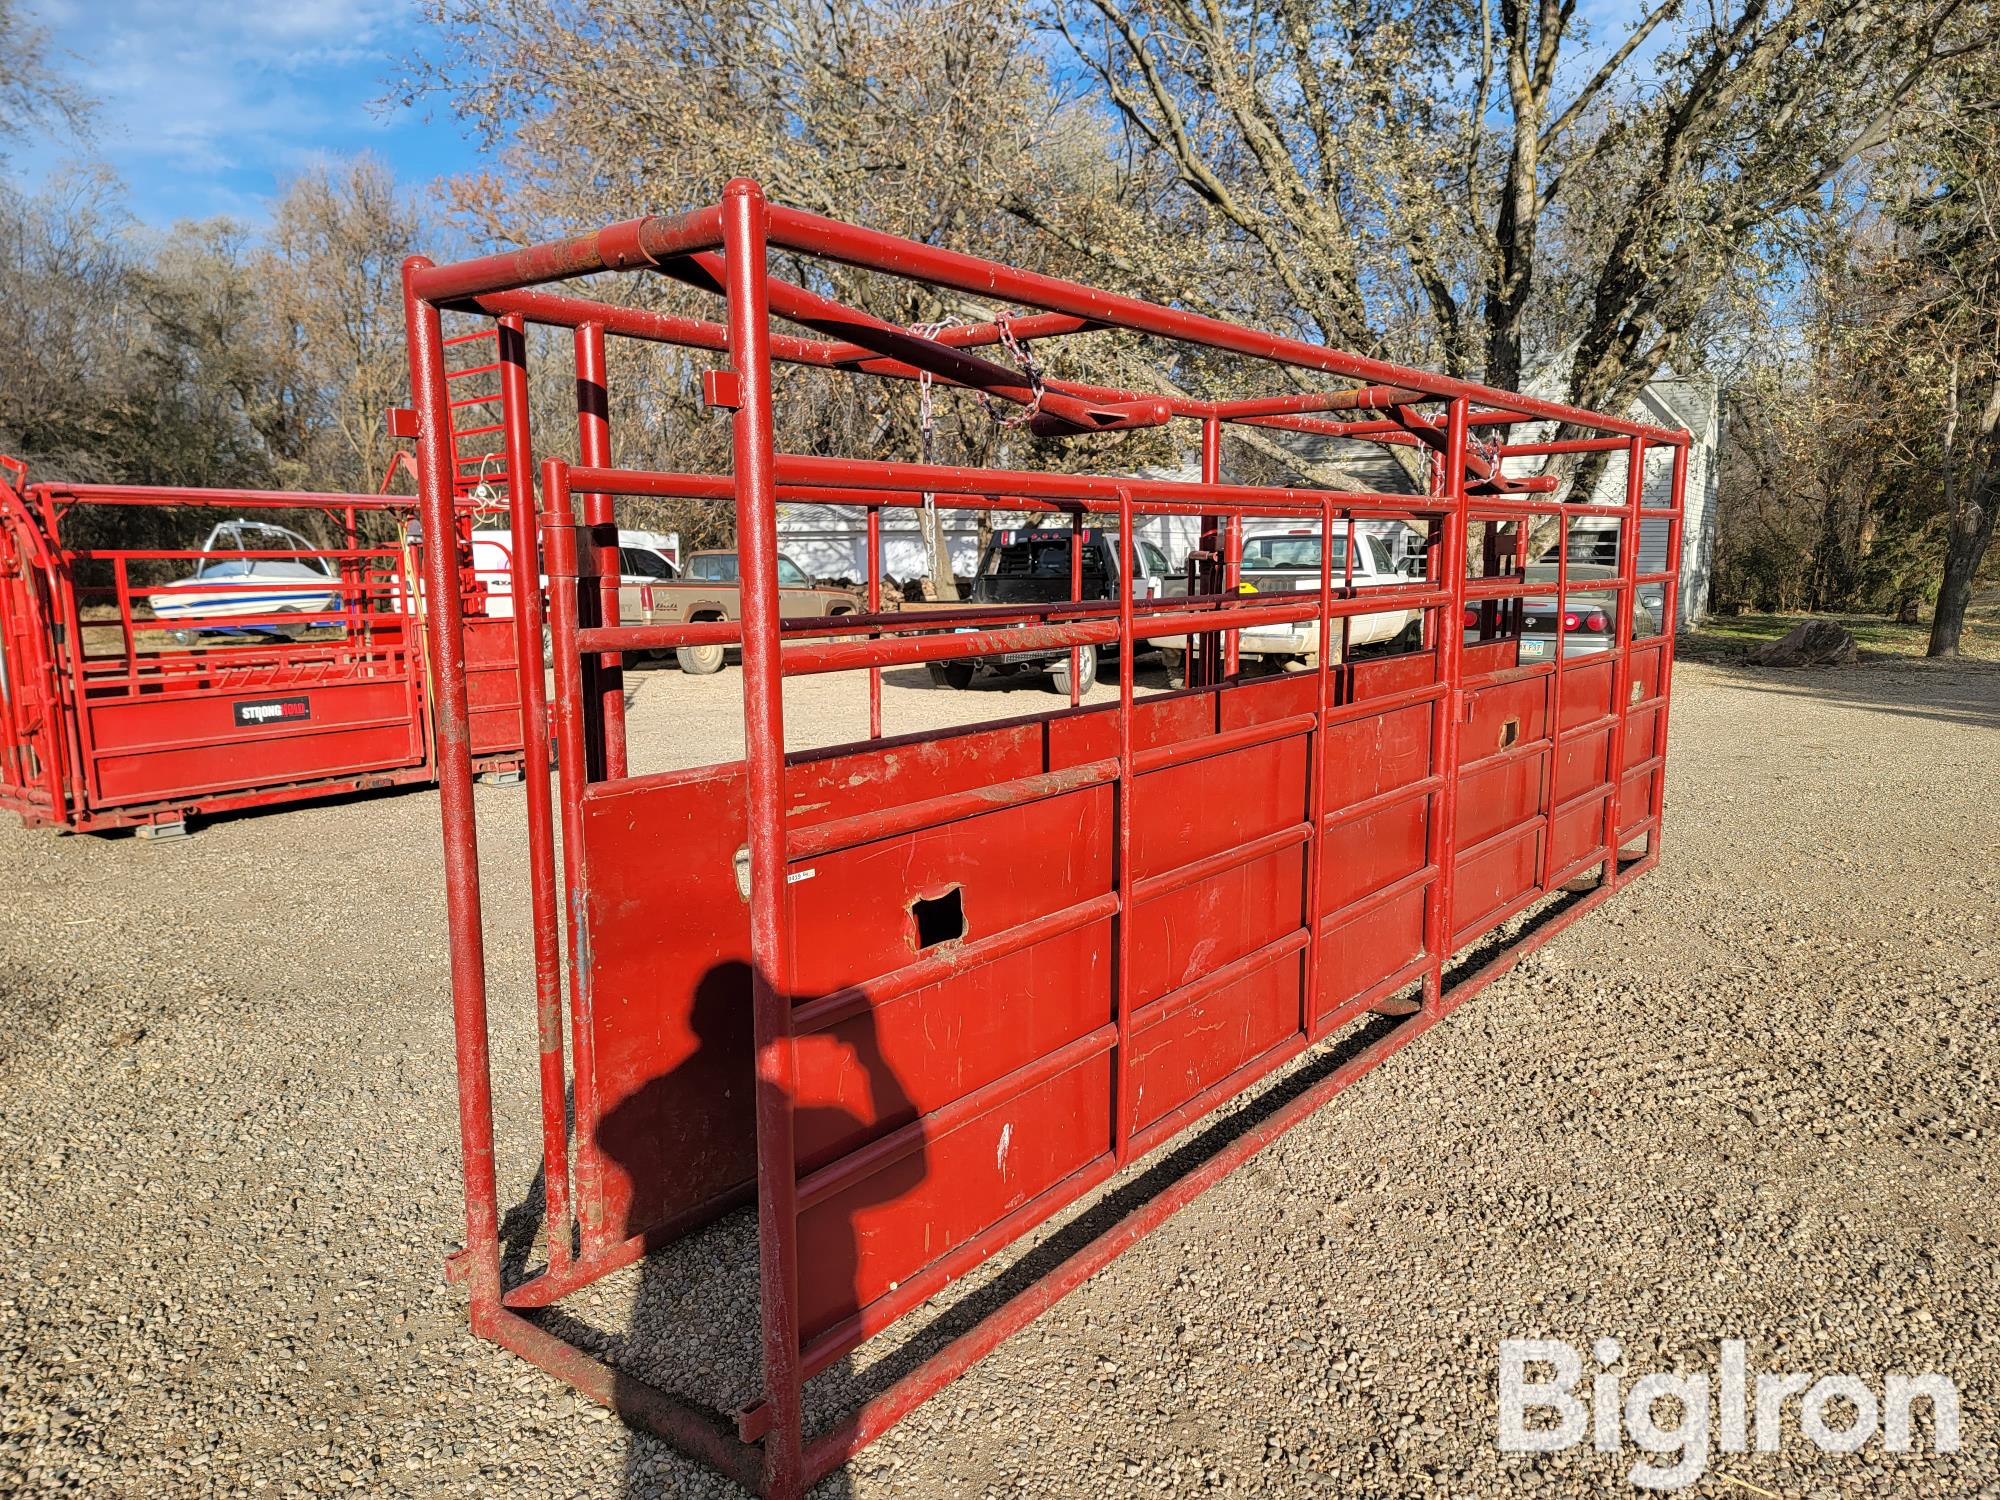 Portable Cattle Alley BigIron Auctions